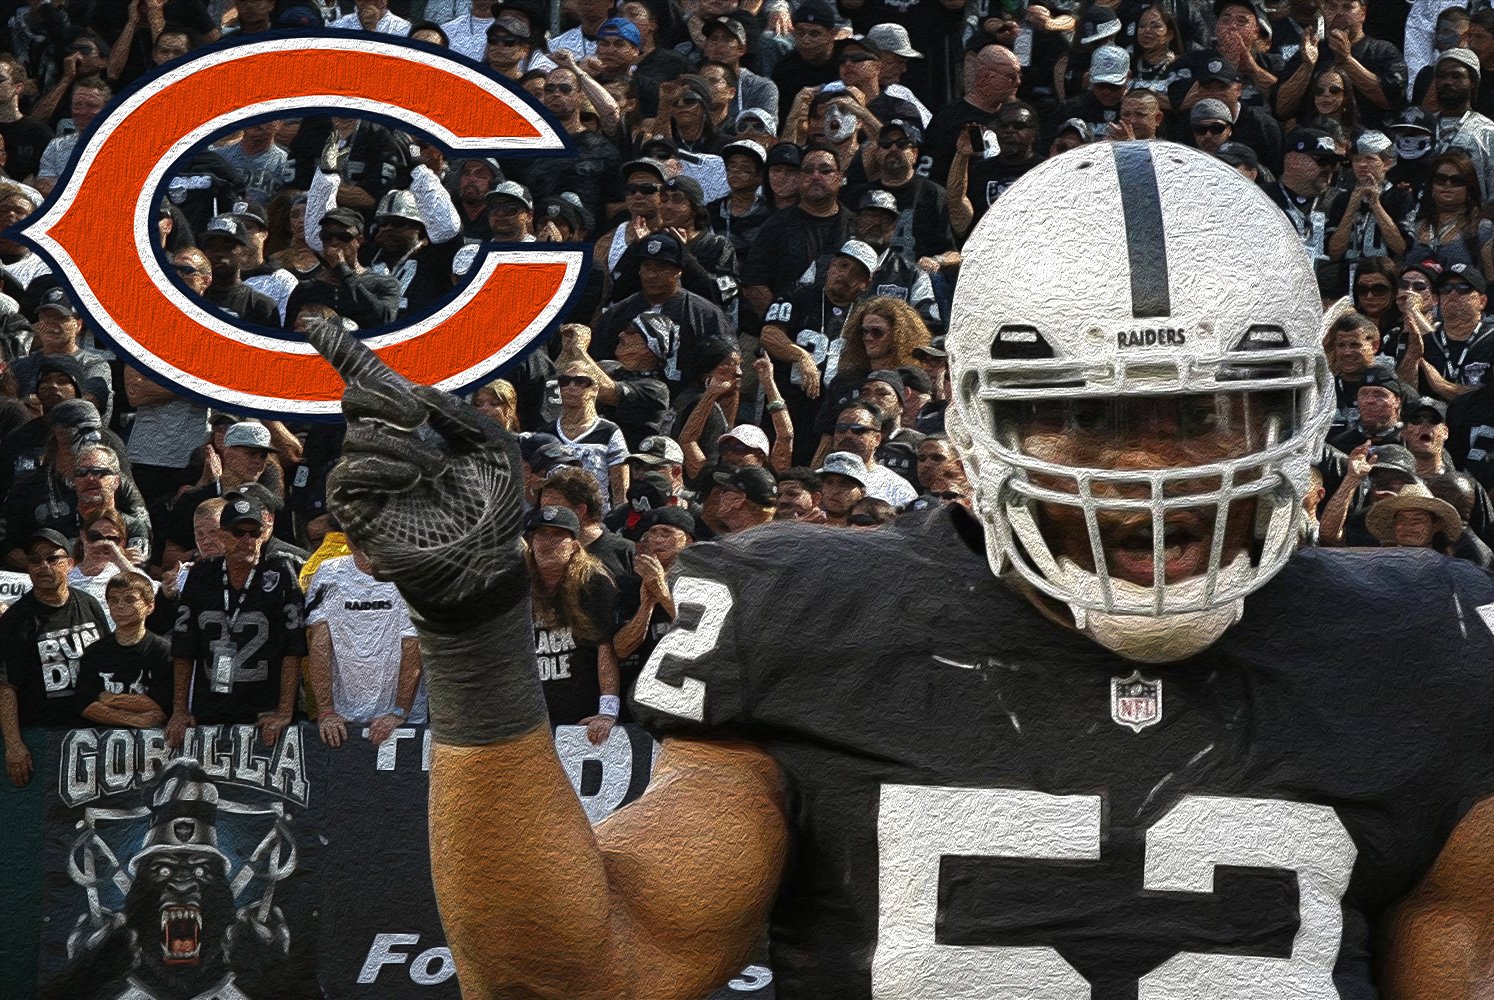 BREAKING: Raiders Trade Khalil Mack To Chicago Bears In Blockbuster Deal